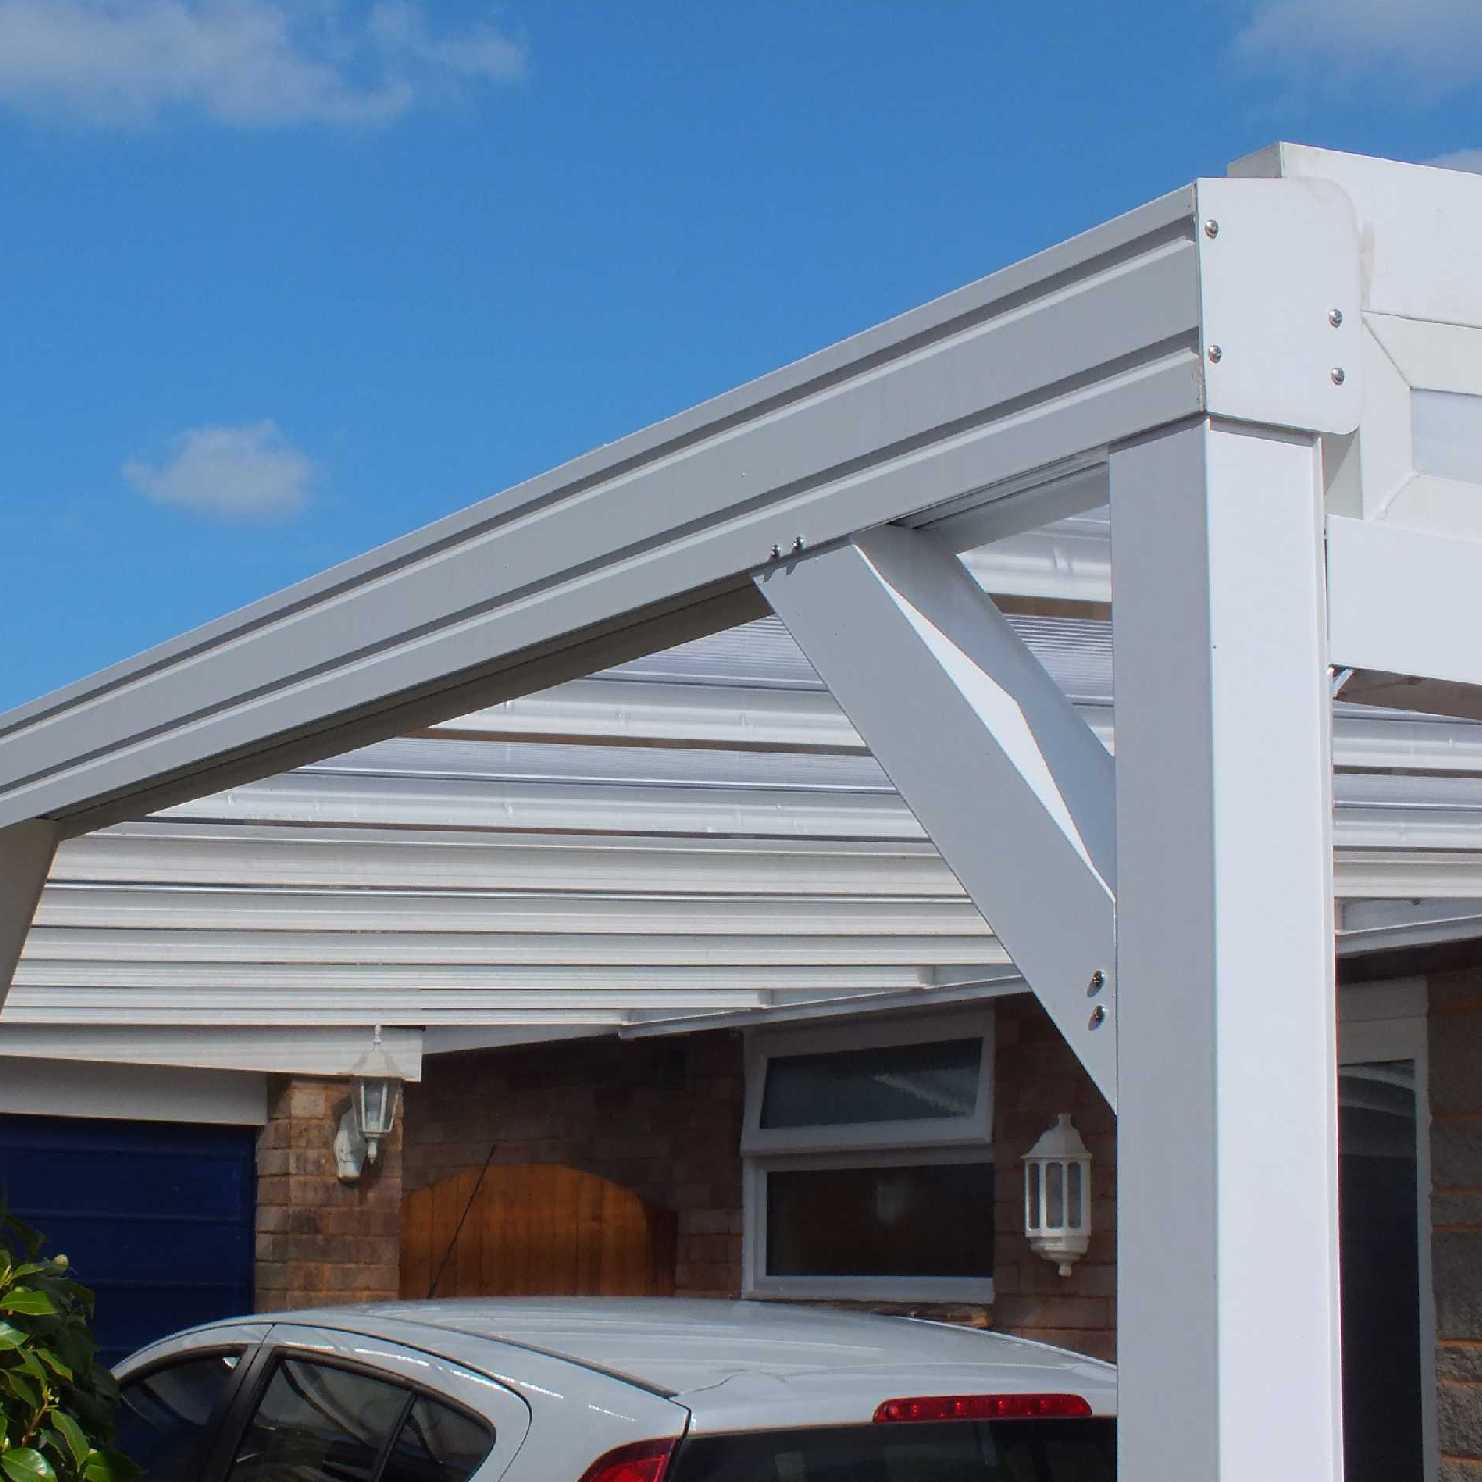 Buy Omega Smart Lean-To Canopy, White with 16mm Polycarbonate Glazing - 6.3m (W) x 2.5m (P), (4) Supporting Posts online today